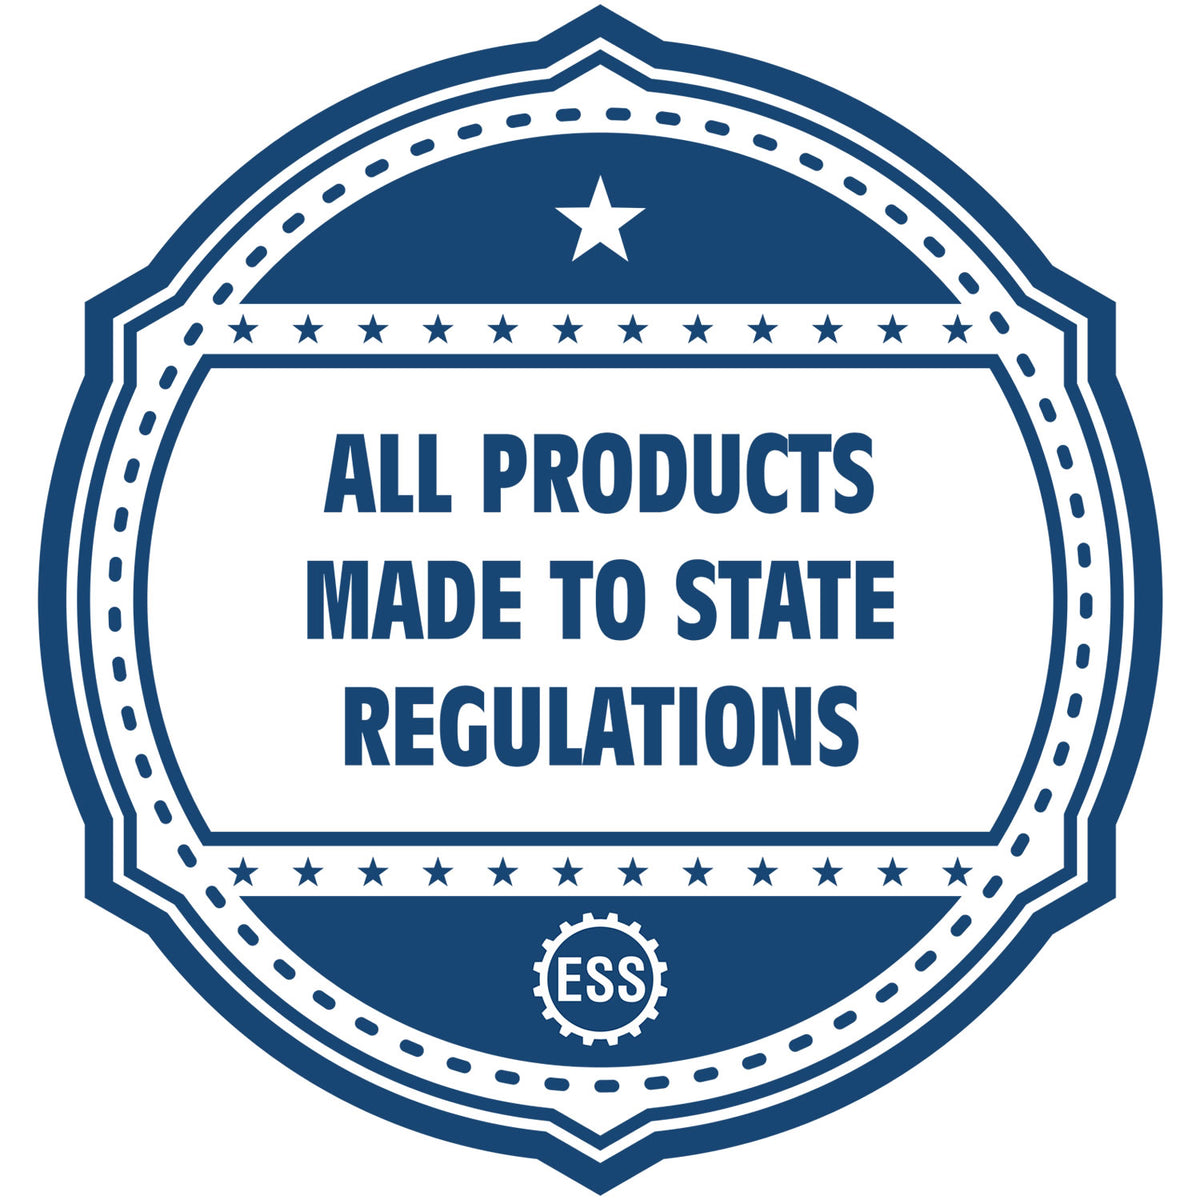 An icon or badge element for the Wooden Handle Alaska State Seal Notary Public Stamp showing that this product is made in compliance with state regulations.